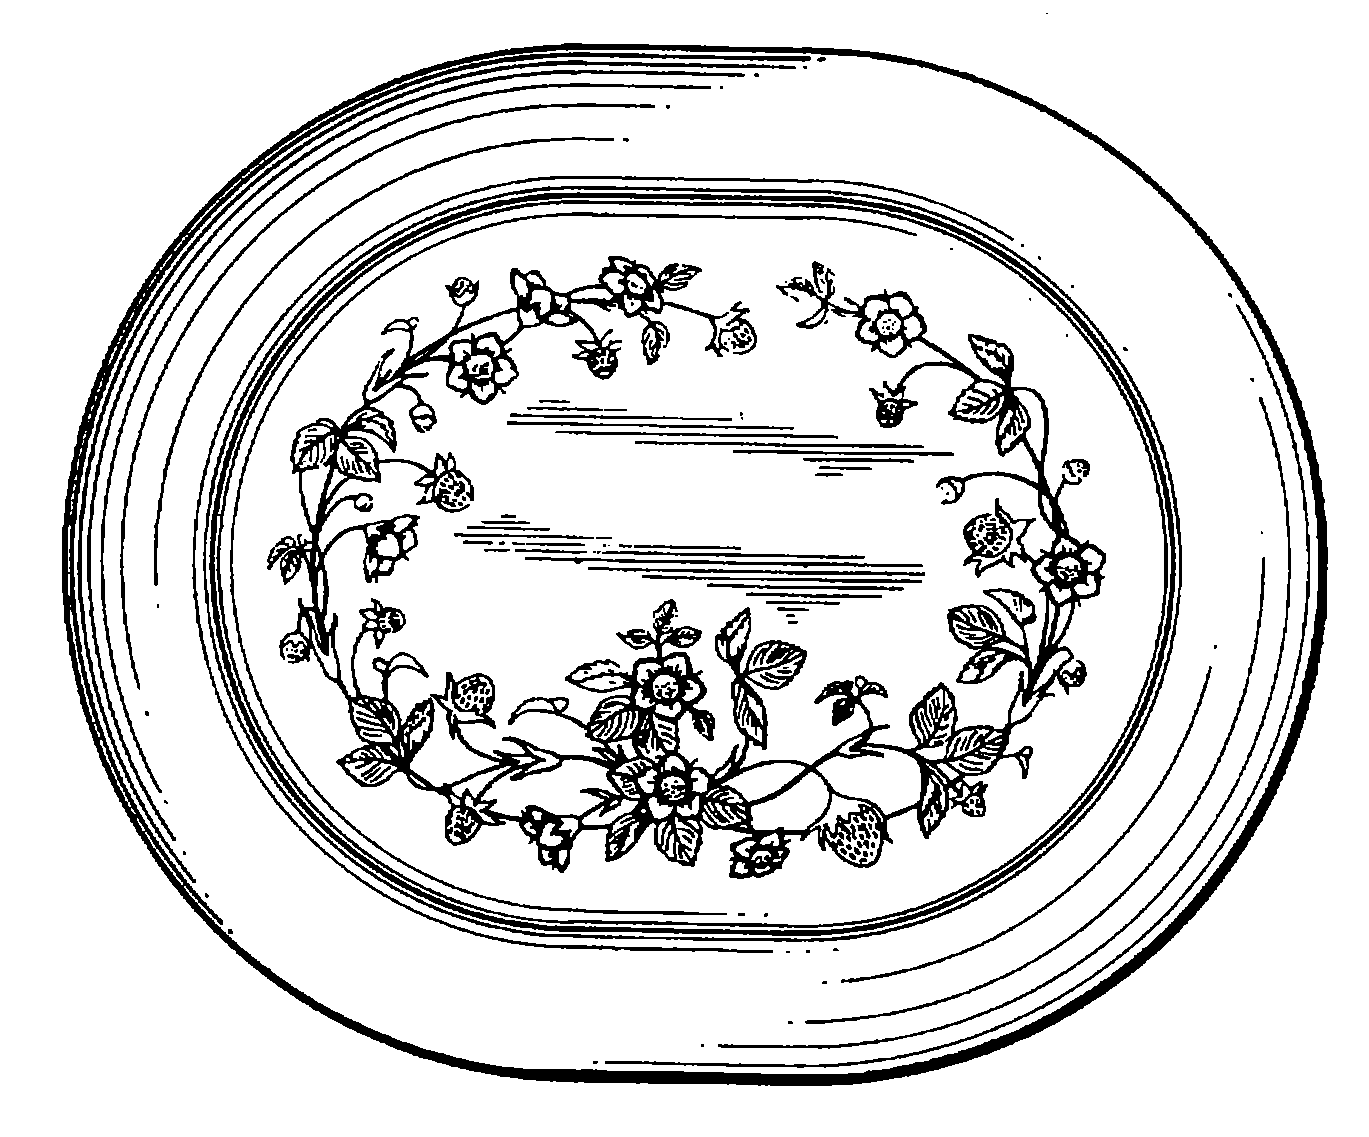 Example of a design for a food server with simulative ornamentationthat shows a flower.
